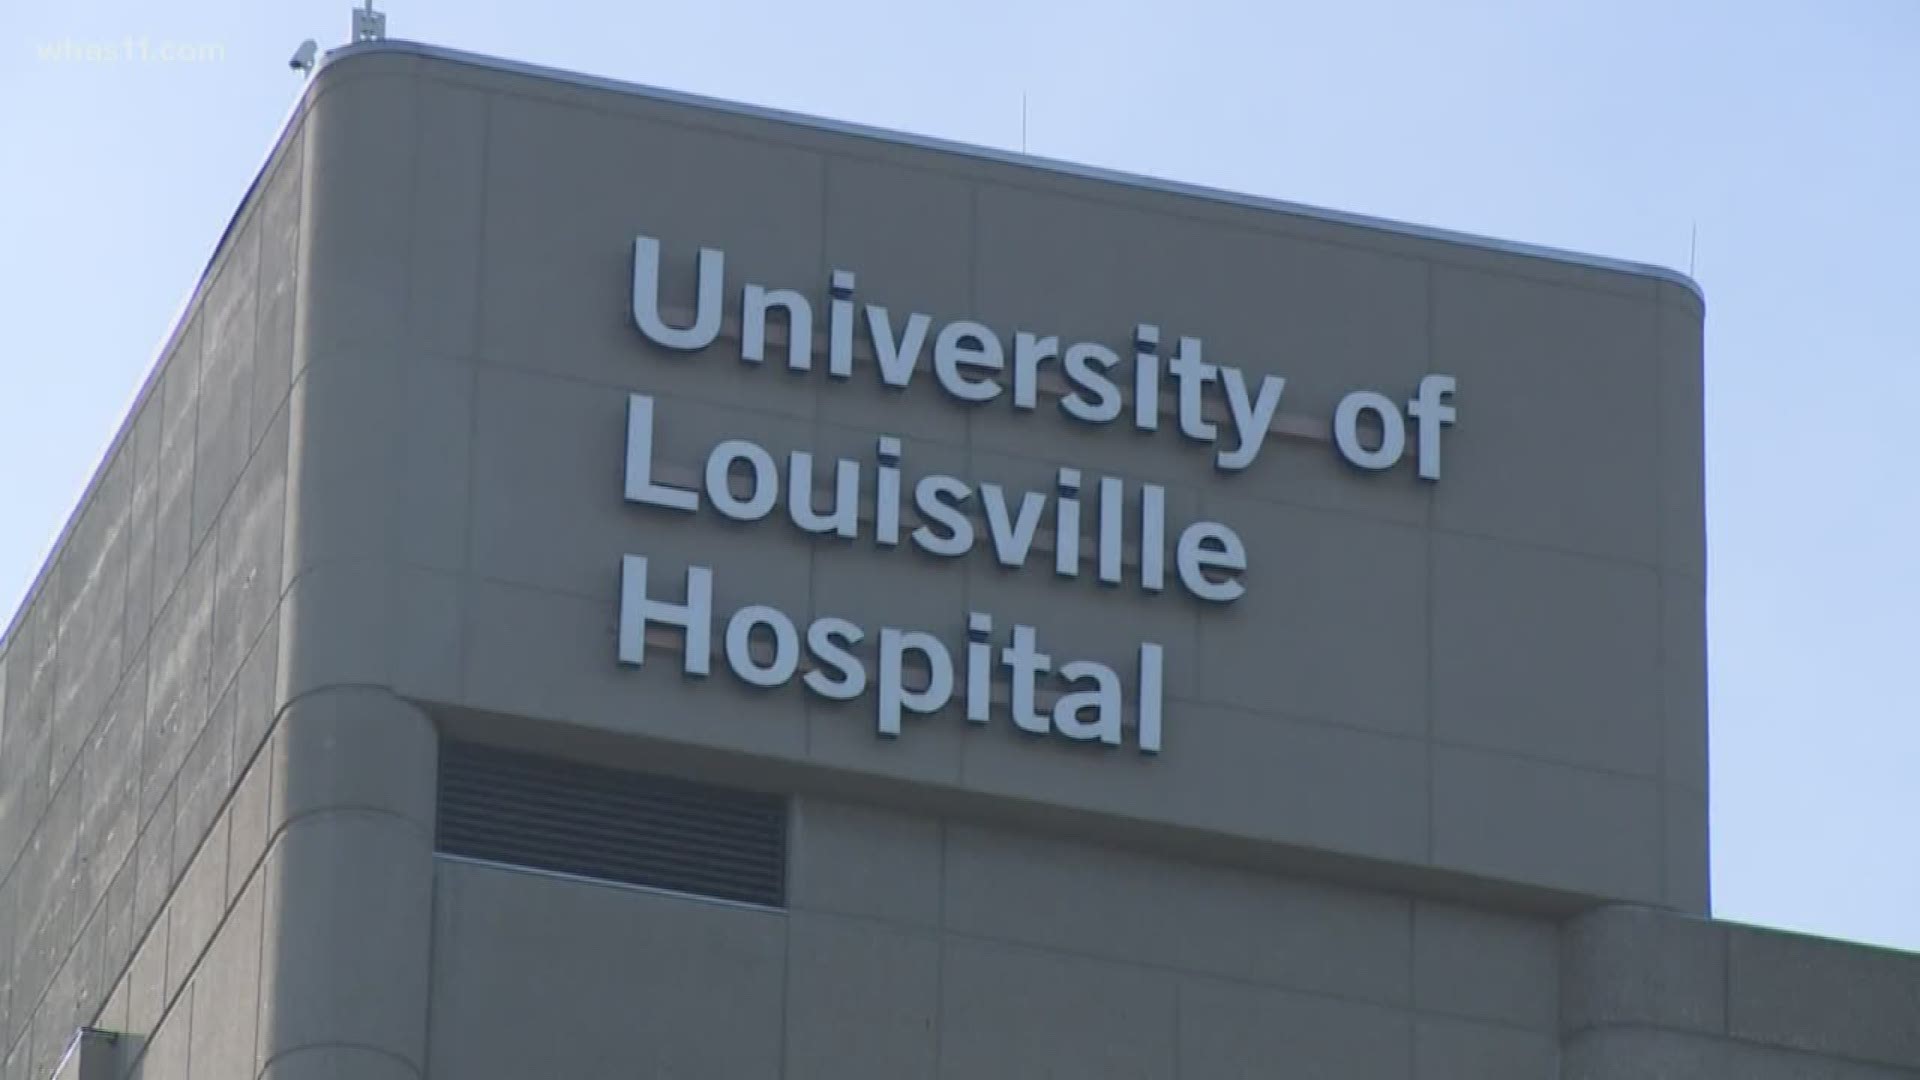 The University of Louisville says it has to capacity to do up to 1,000 cases per day, and process results within 24 hours.